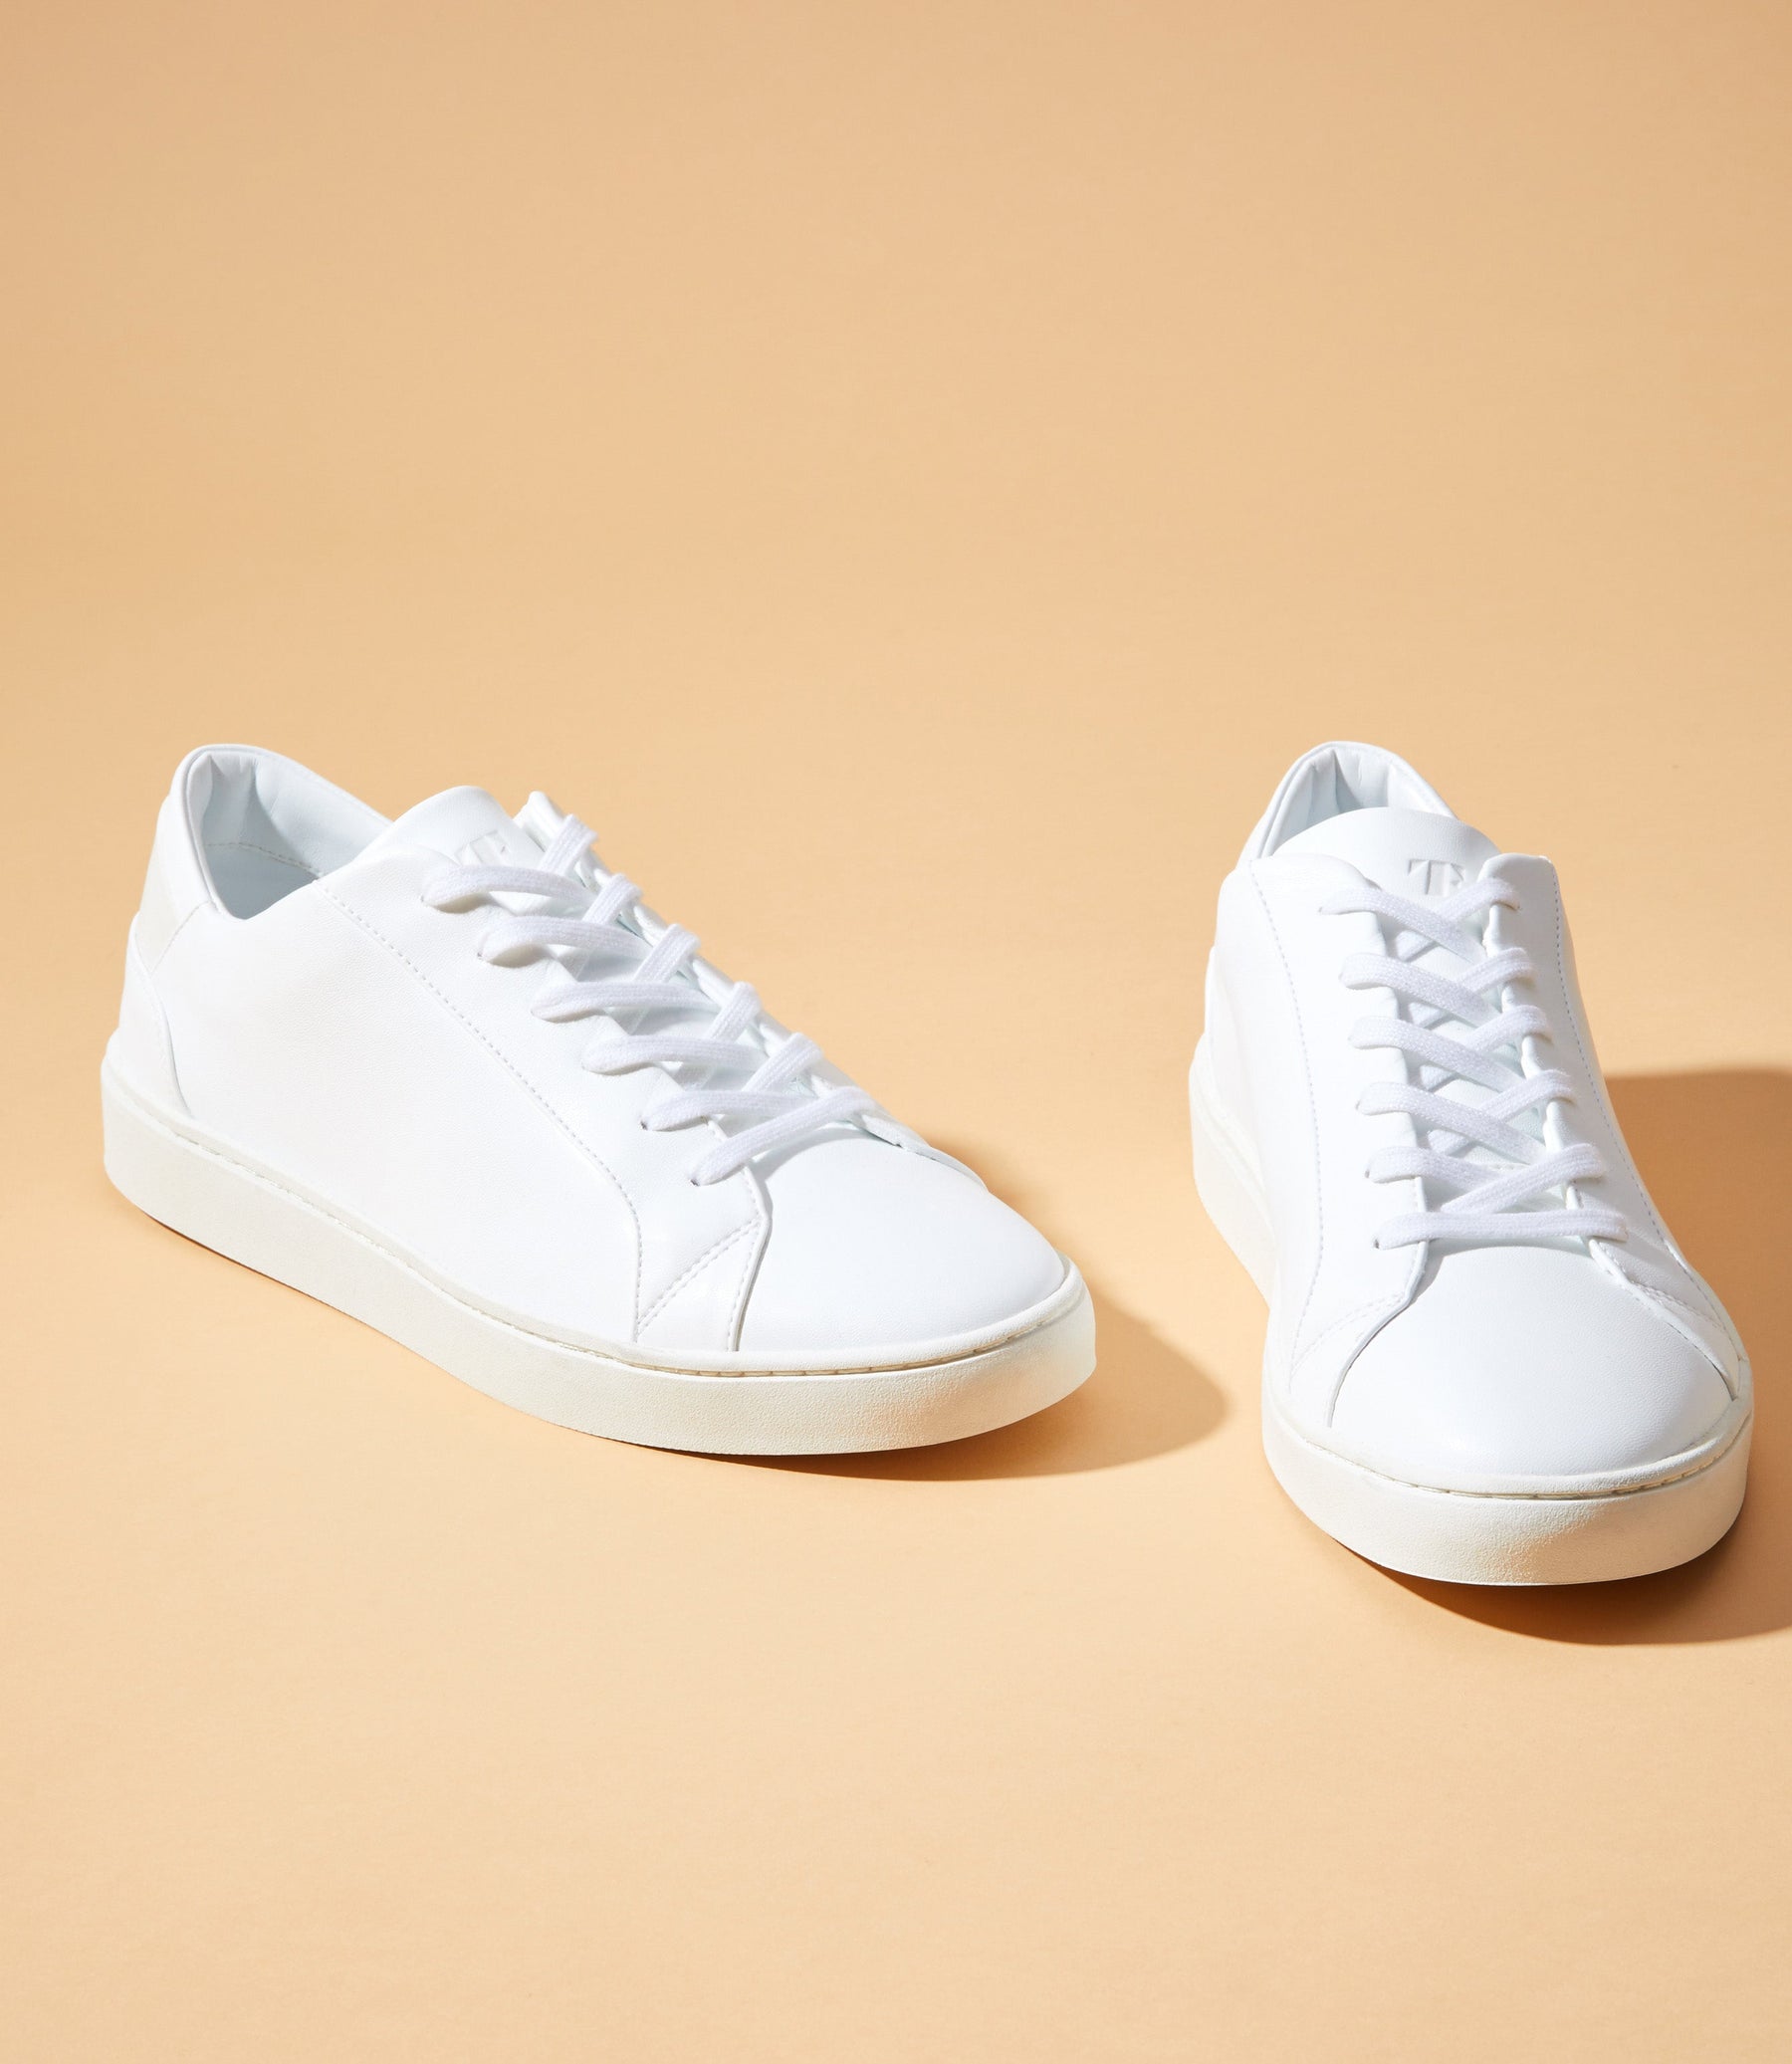 classic white sneakers made from recycled materials